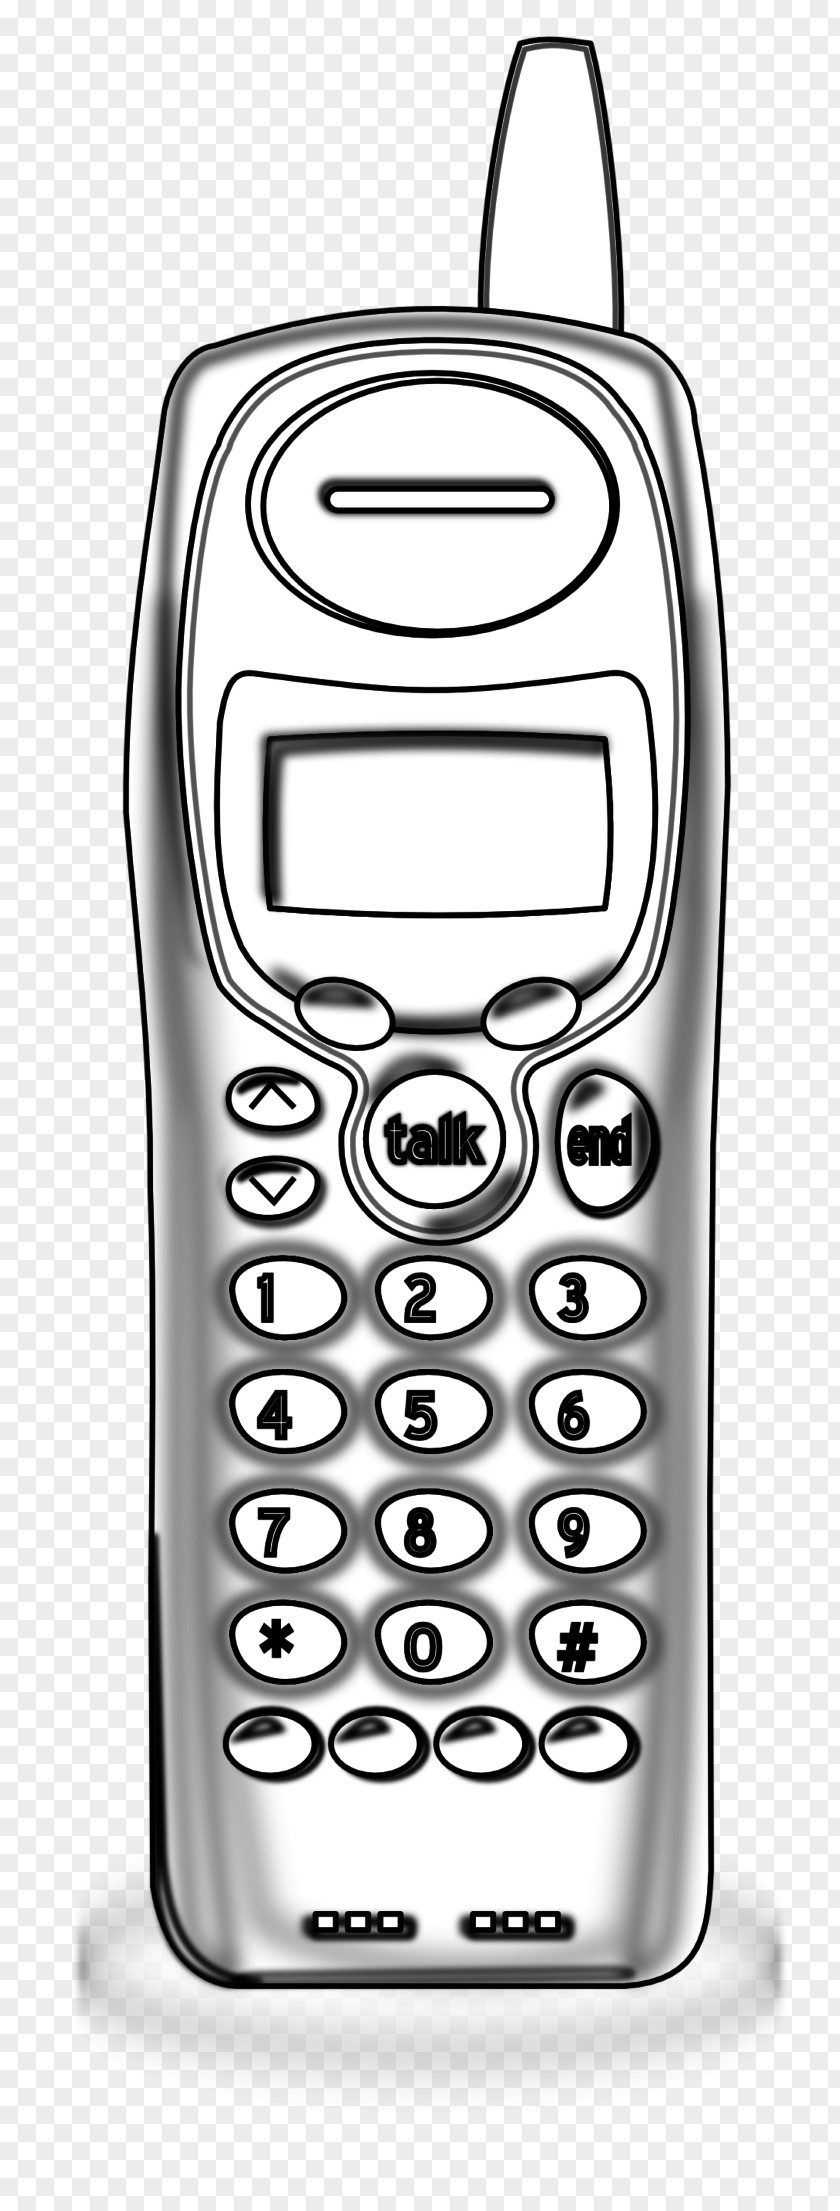 Cell Phone Cartoon Coloring Book Cordless Telephone Chatter IPhone PNG